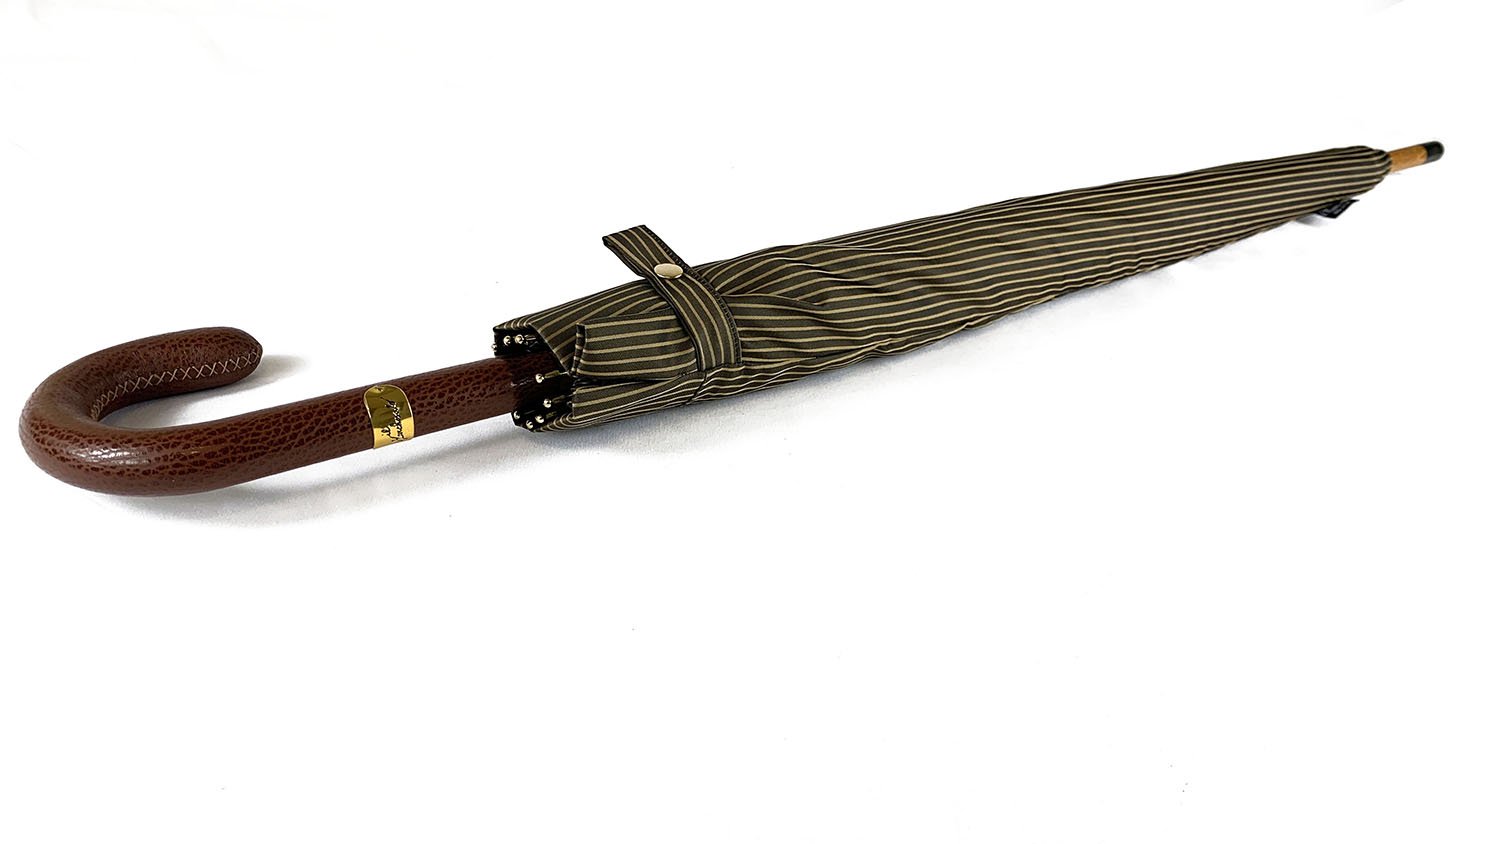 Classic Striped umbrella with Brown Leather handle - IL MARCHESATO LUXURY UMBRELLAS, CANES AND SHOEHORNS